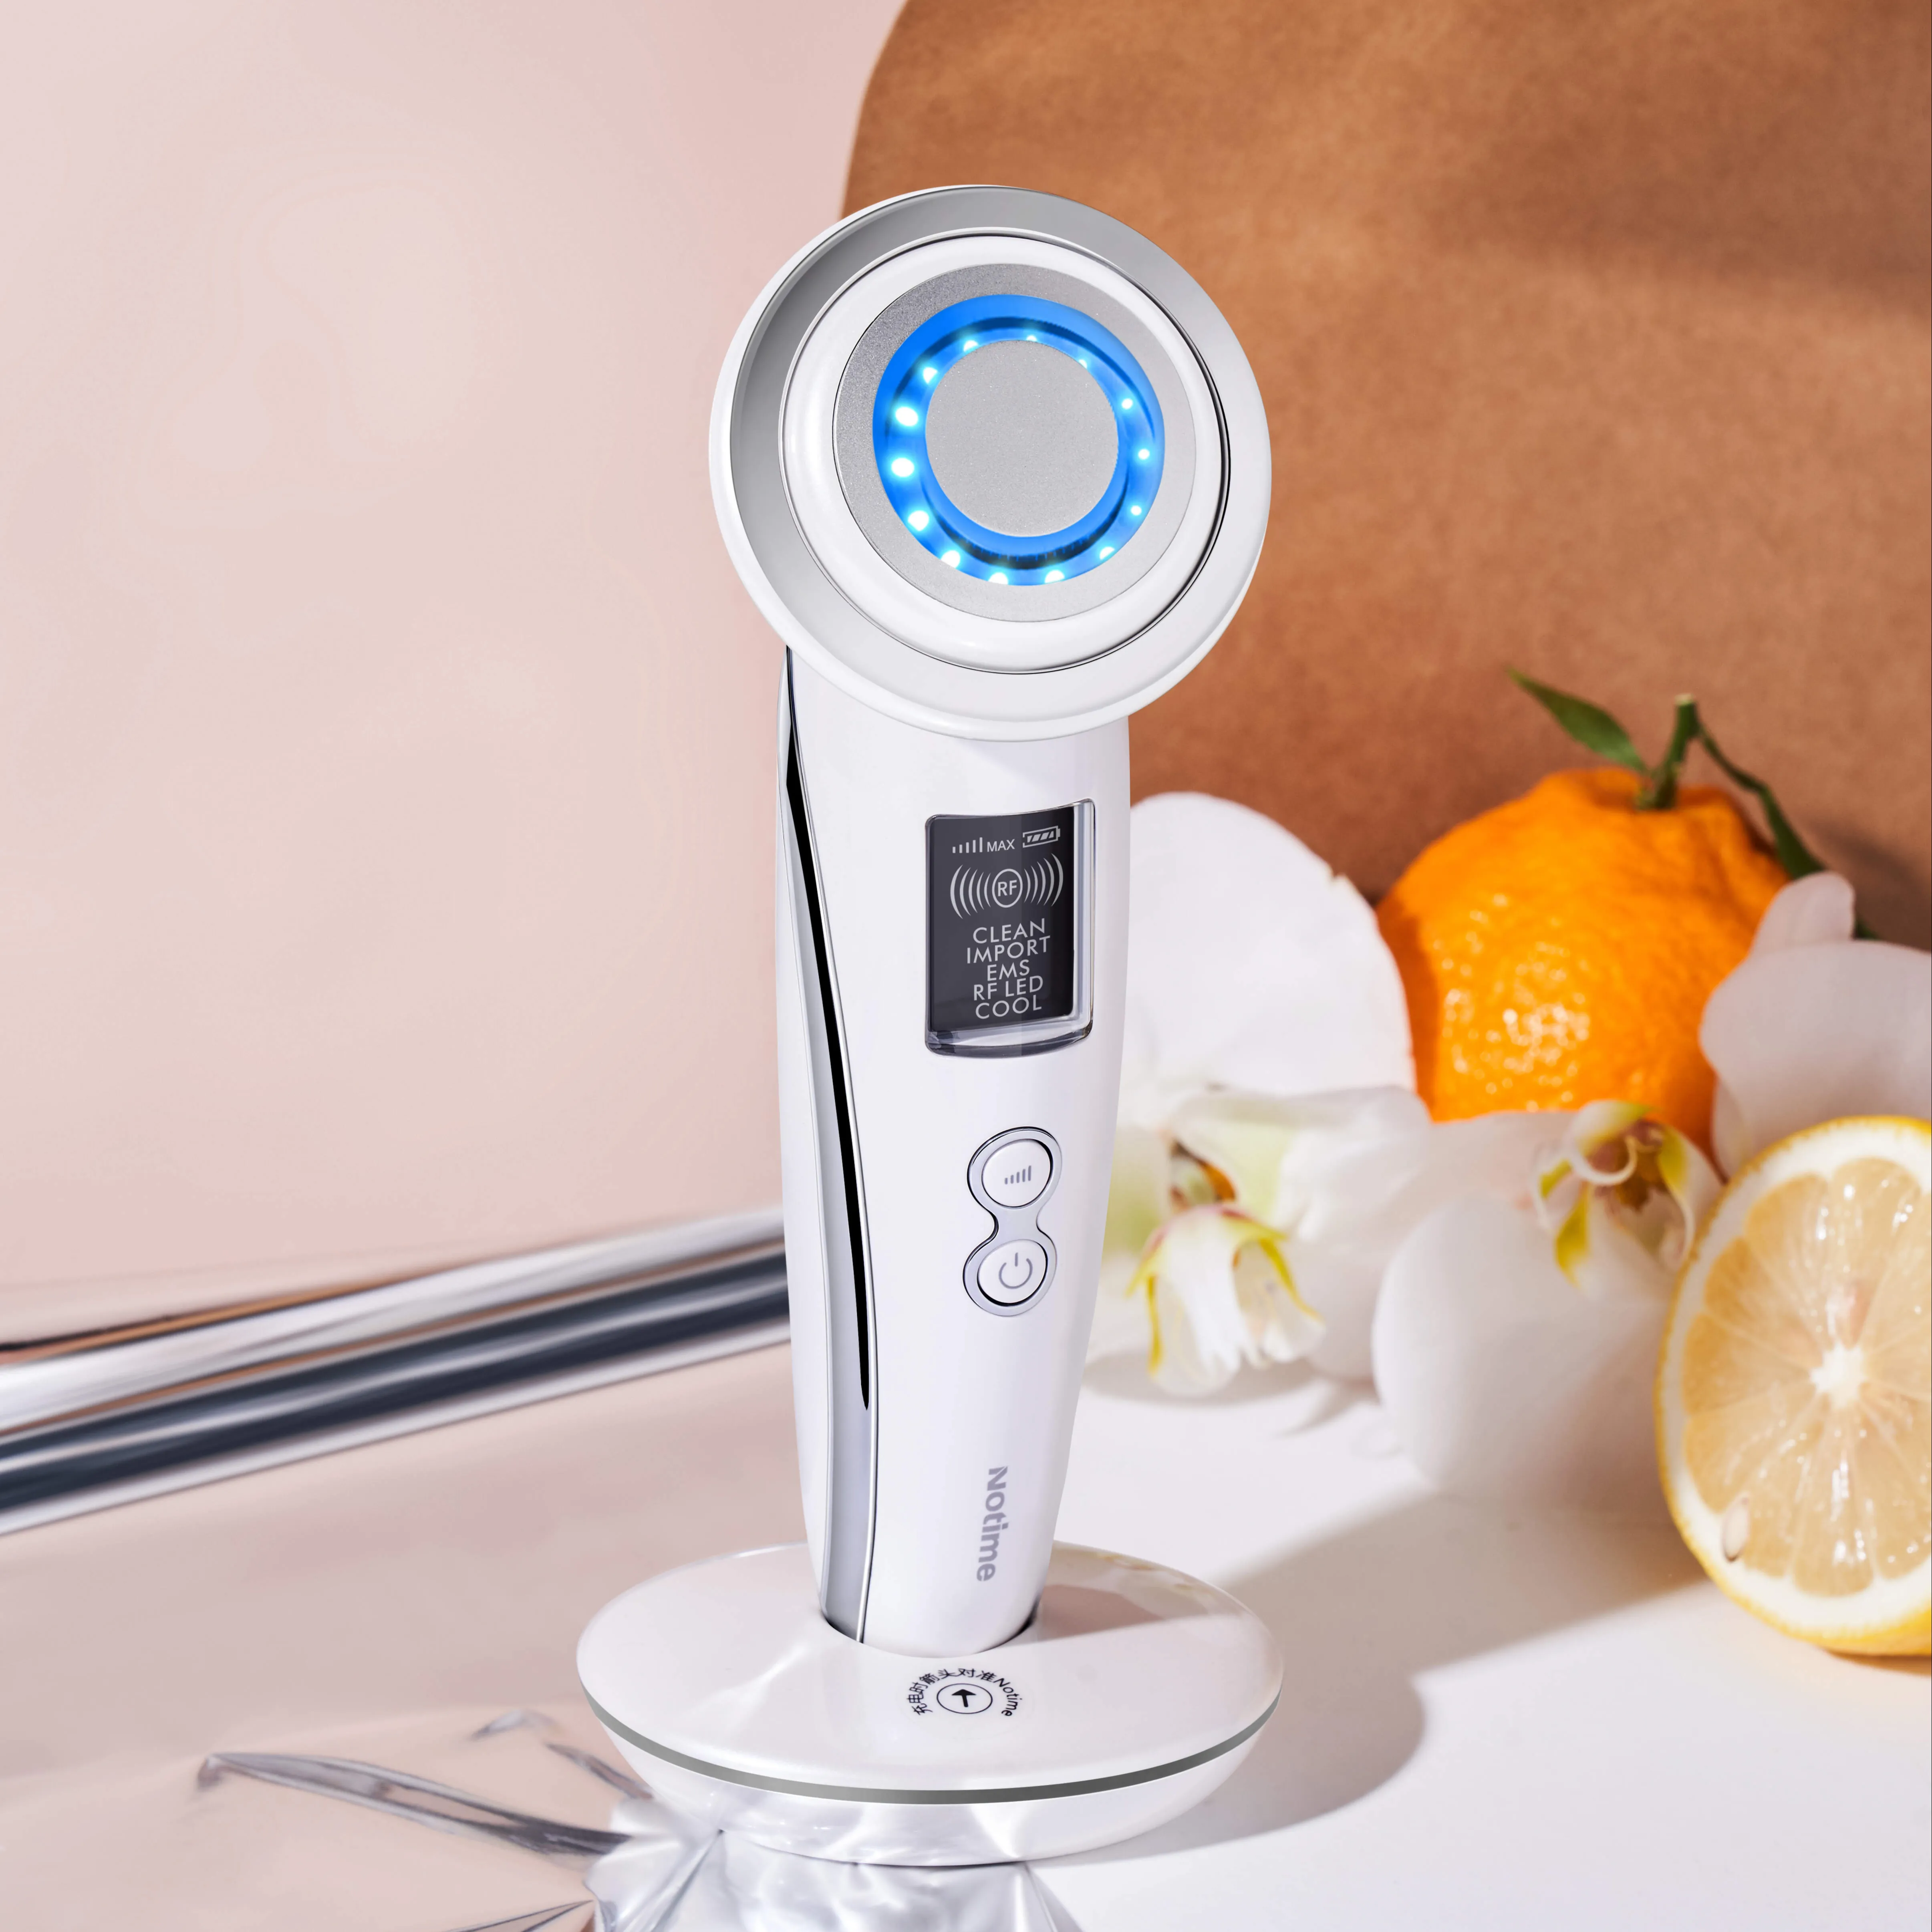 Newest RF EMS Face Lift Skin Tightening Machine Home Use Portable Rf Beauty Massager Instrument Remove Wrinkles beauty device